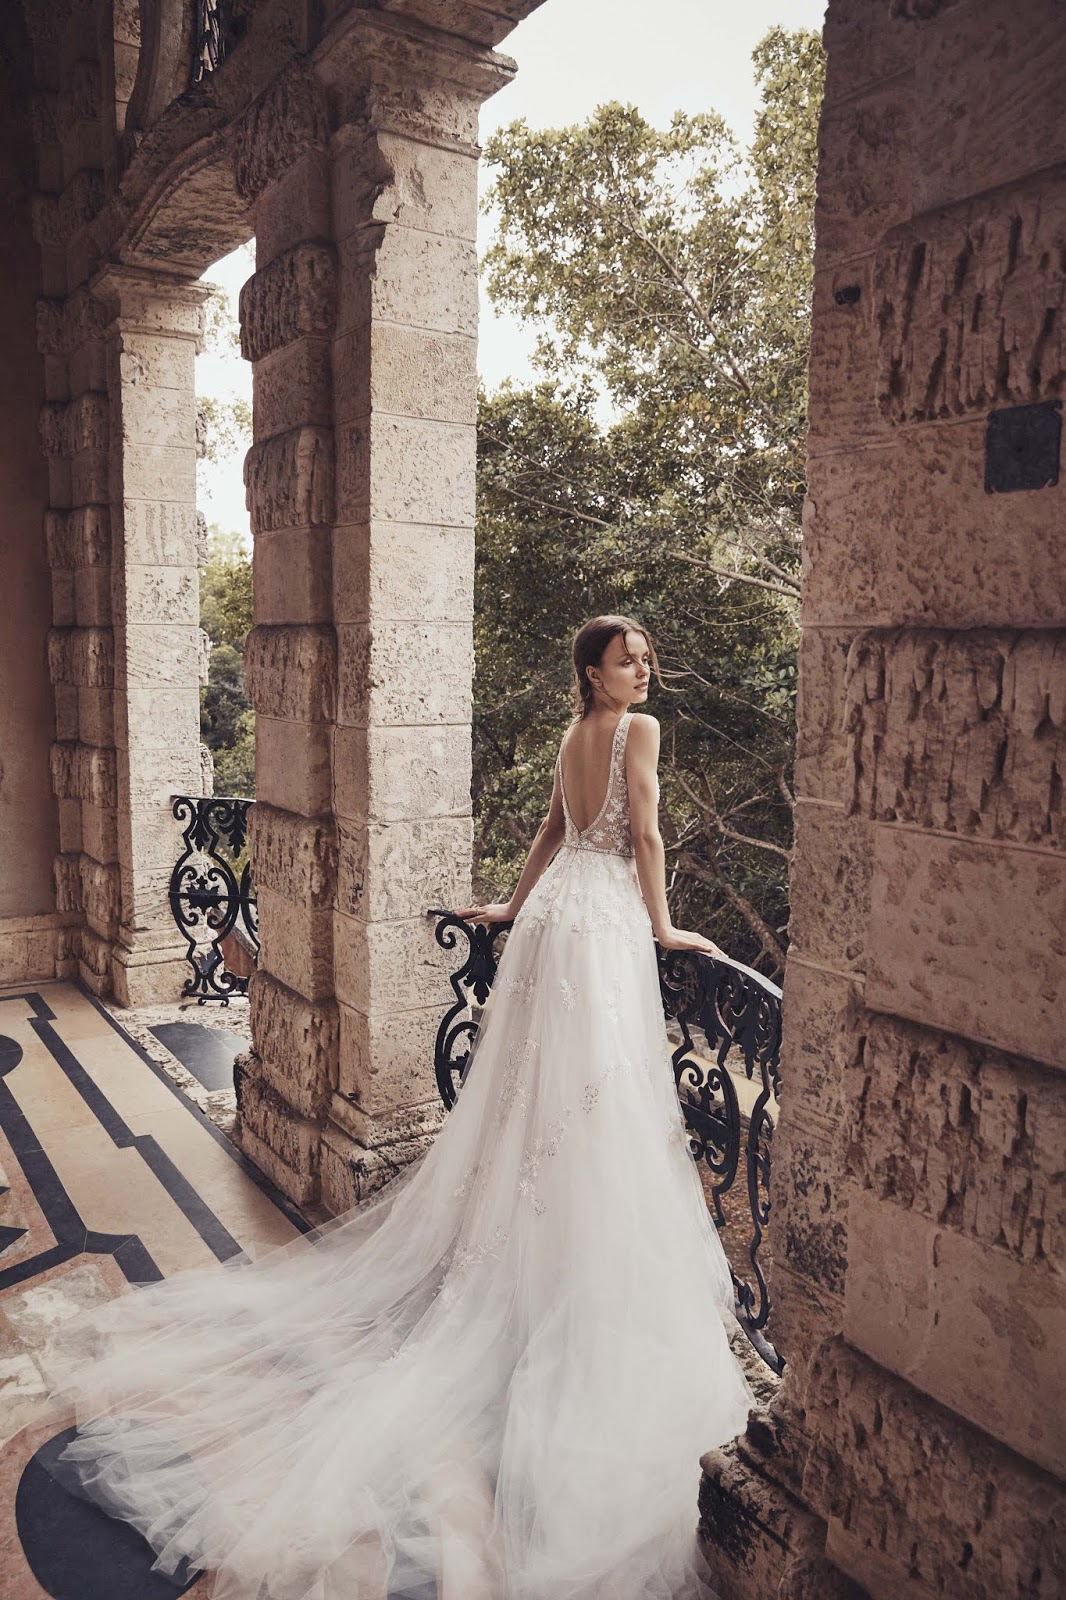 Dreamy Wedding Gowns by MONIQUE LHUILLIER